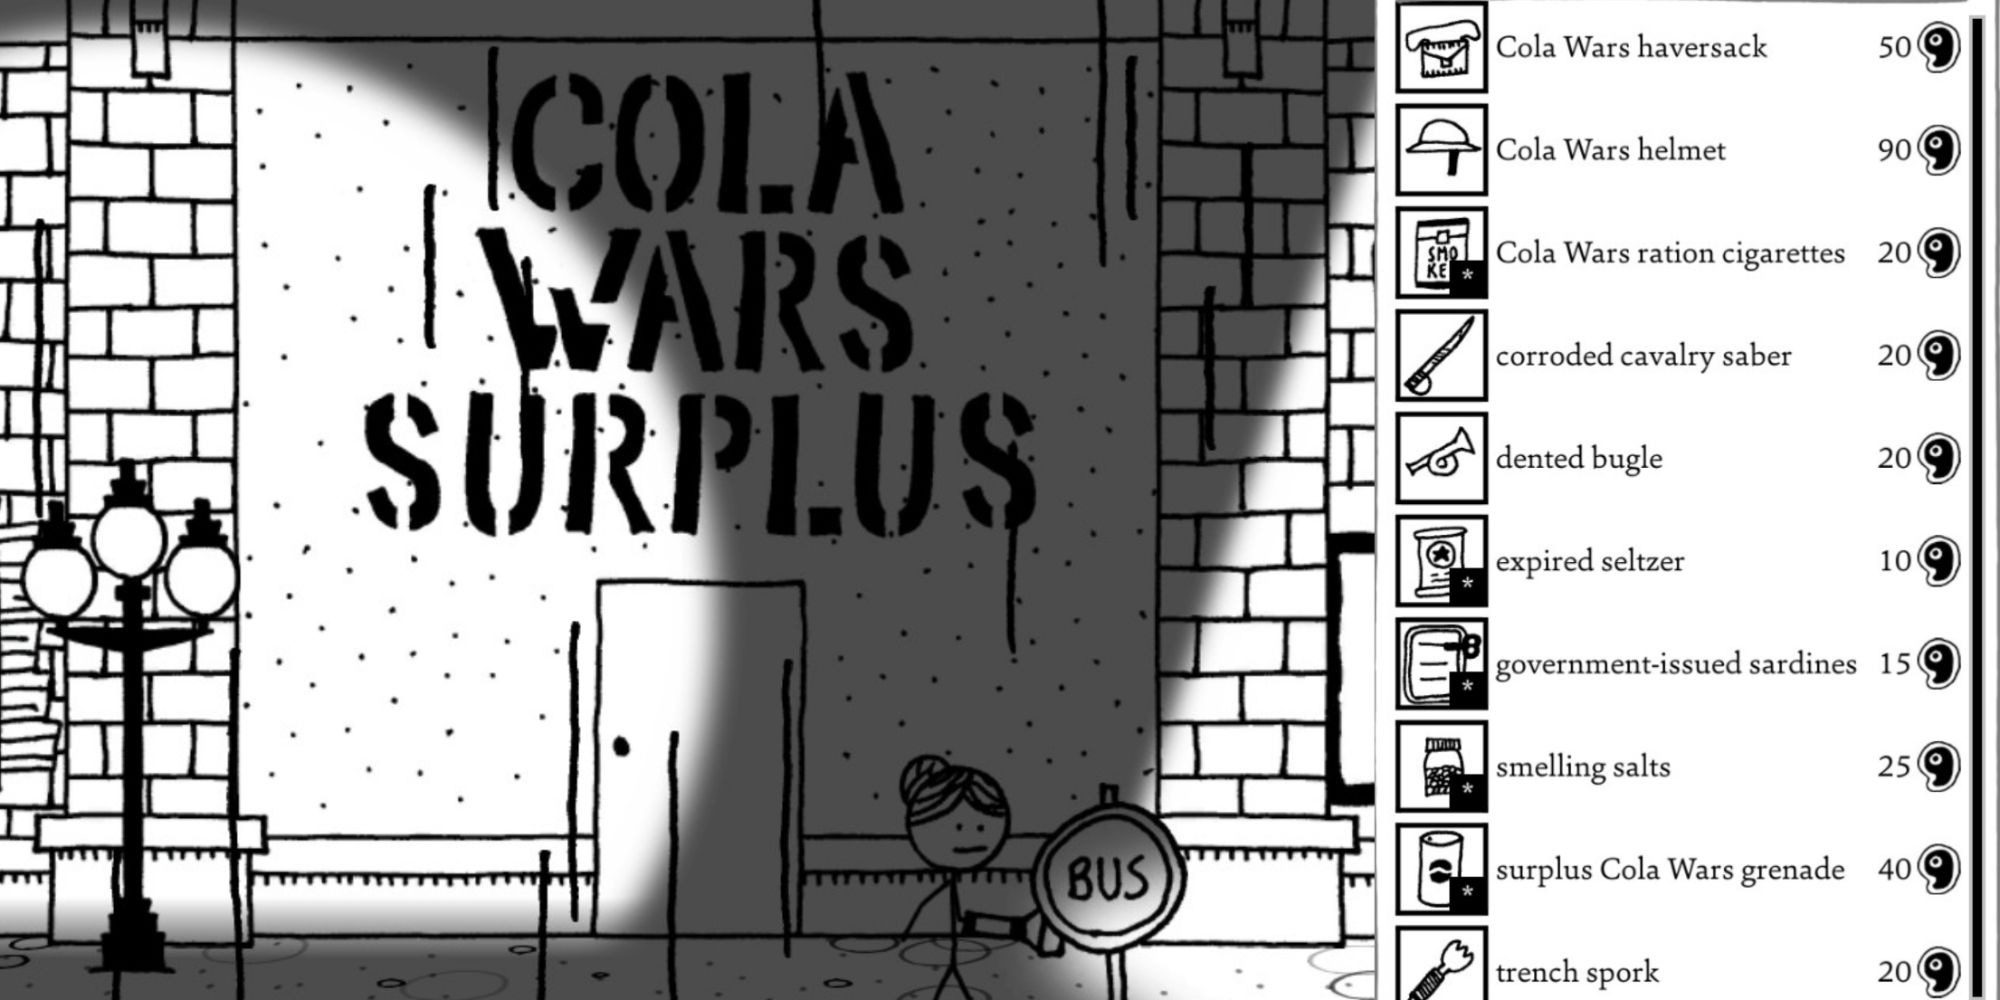 A split image showing a character outside the Cola Wars Surplus store and the shop menu in Shadows Over Loathing